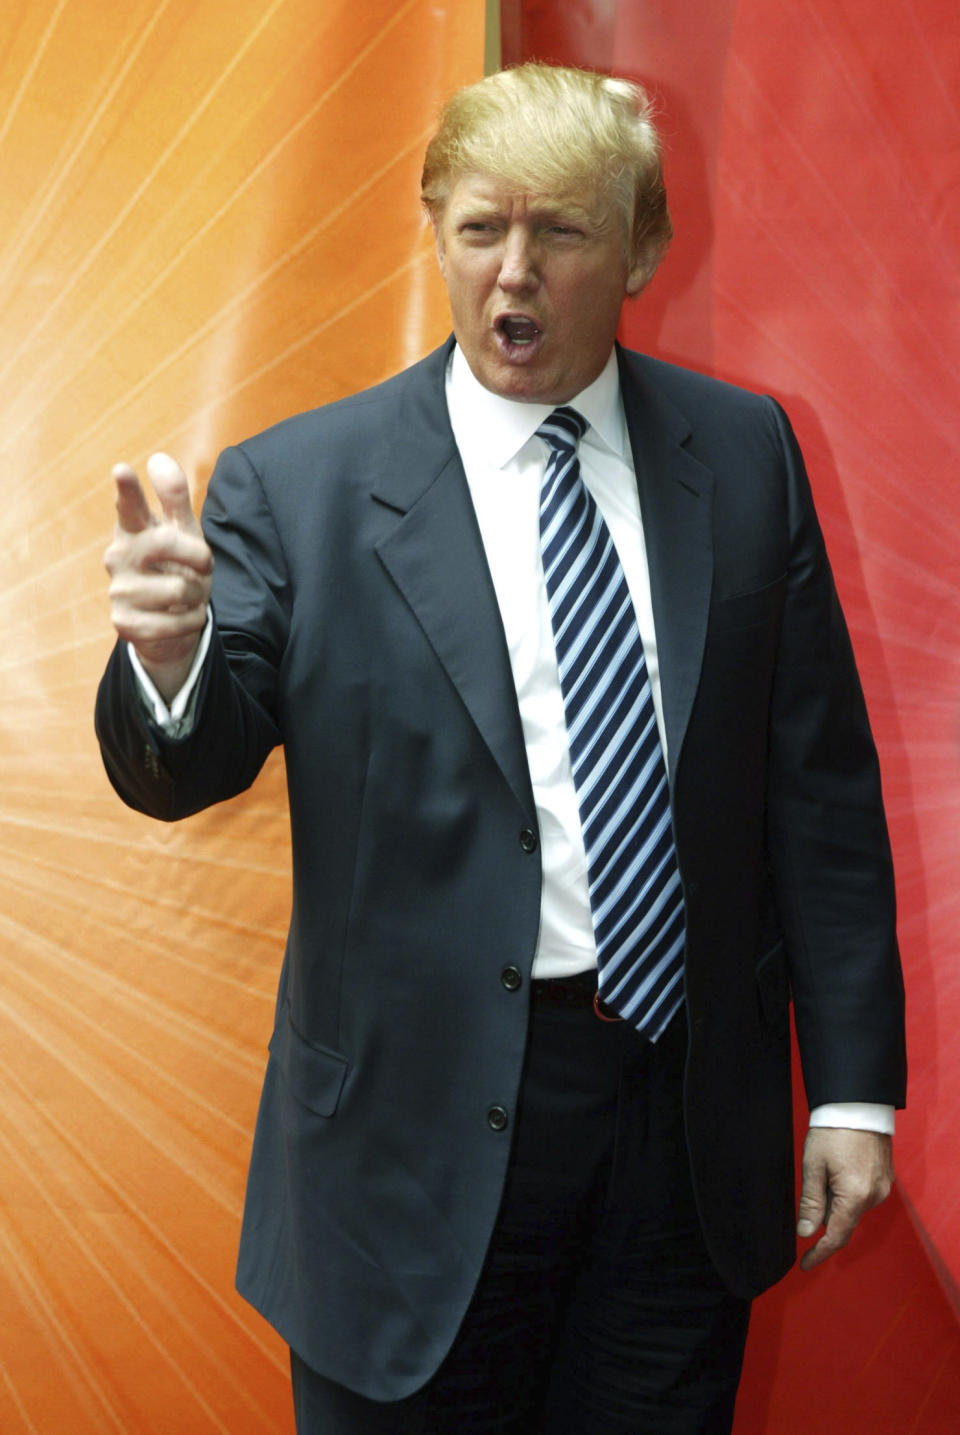 FILE - Mogul Donald Trump, who stars in NBC's "The Apprentice," strikes his classic "You're fired" pose as he arrives at Radio City Music Hall for a presentation of new and returning NBC shows, Monday, May 16, 2005, in New York. A producer's new account of Trump's behavior on "The Apprentice" is resurfacing allegations about whether he mistreated Black people who appeared on the show. (AP Photo/Mary Altaffer, File)